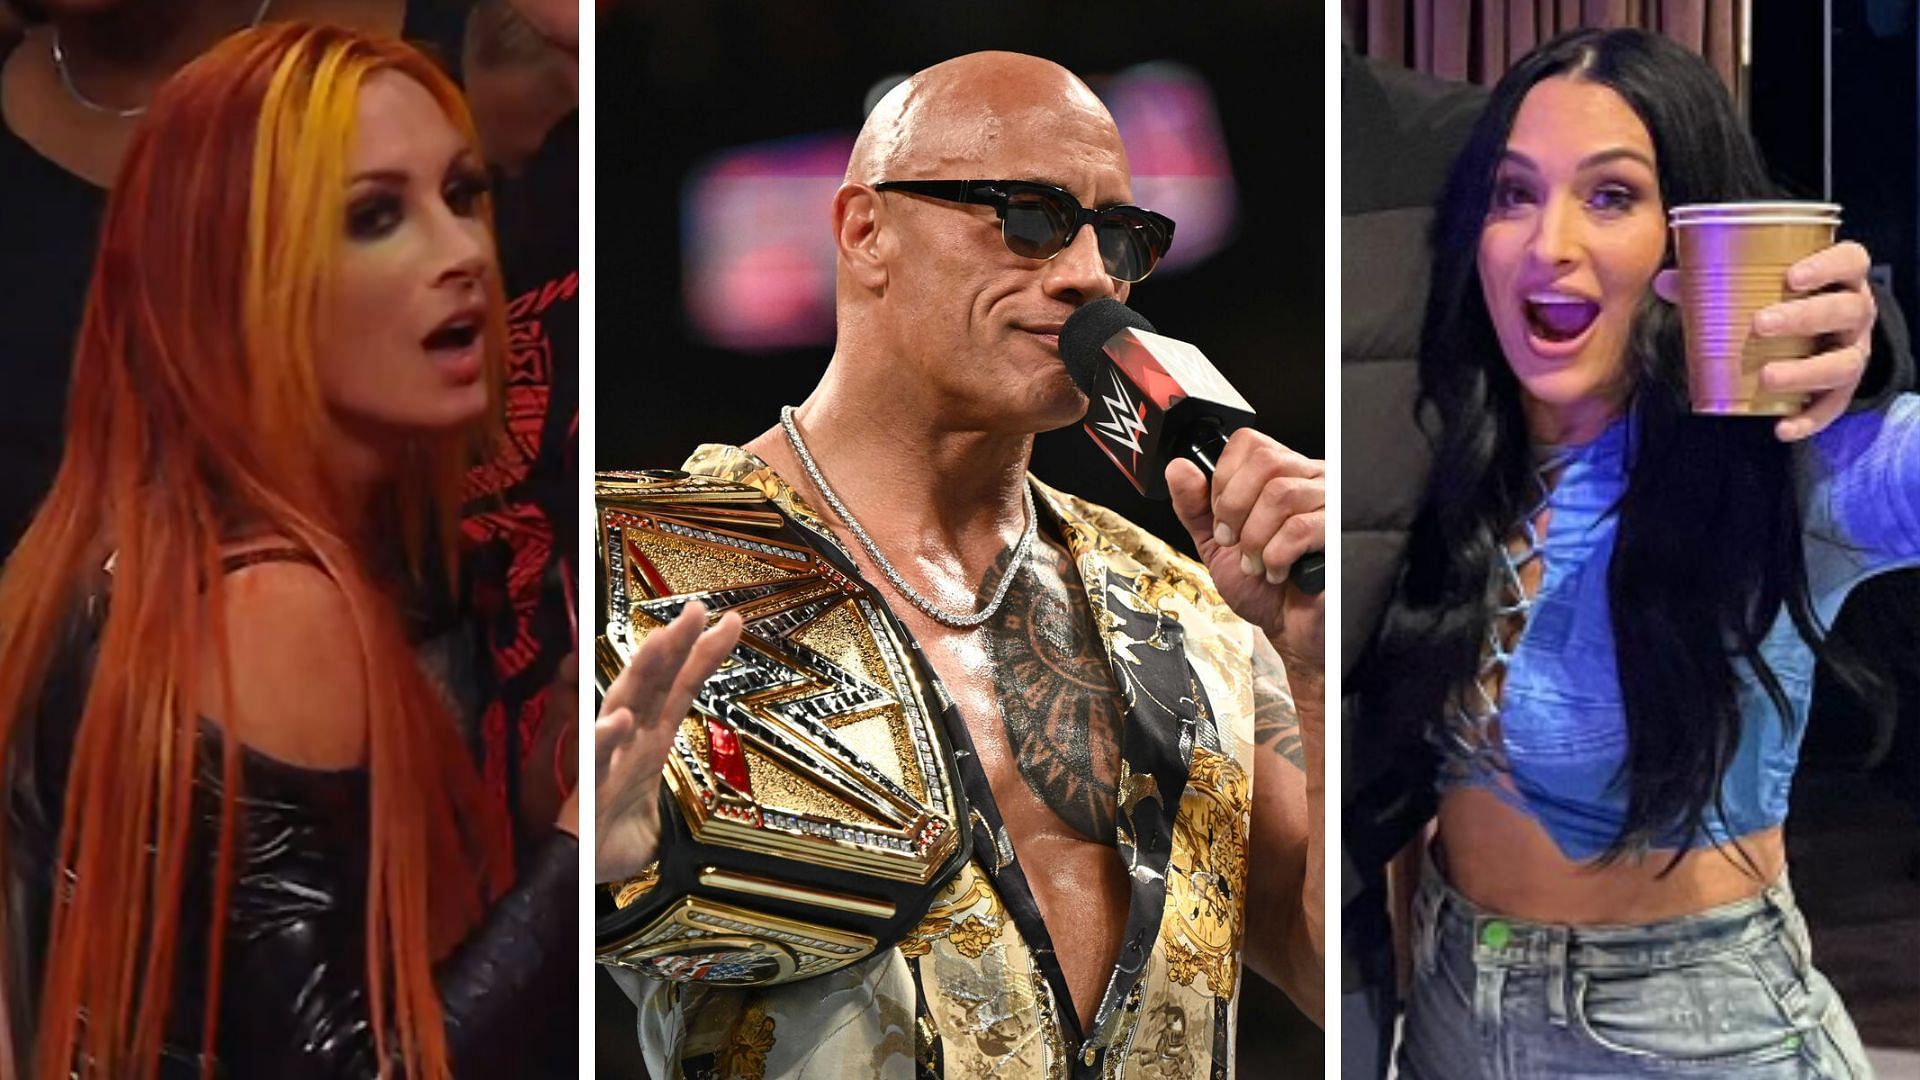 Becky Lynch on the left, The Rock in the middle, Nikki Bella on the right [Image credits: Lynch and Bella